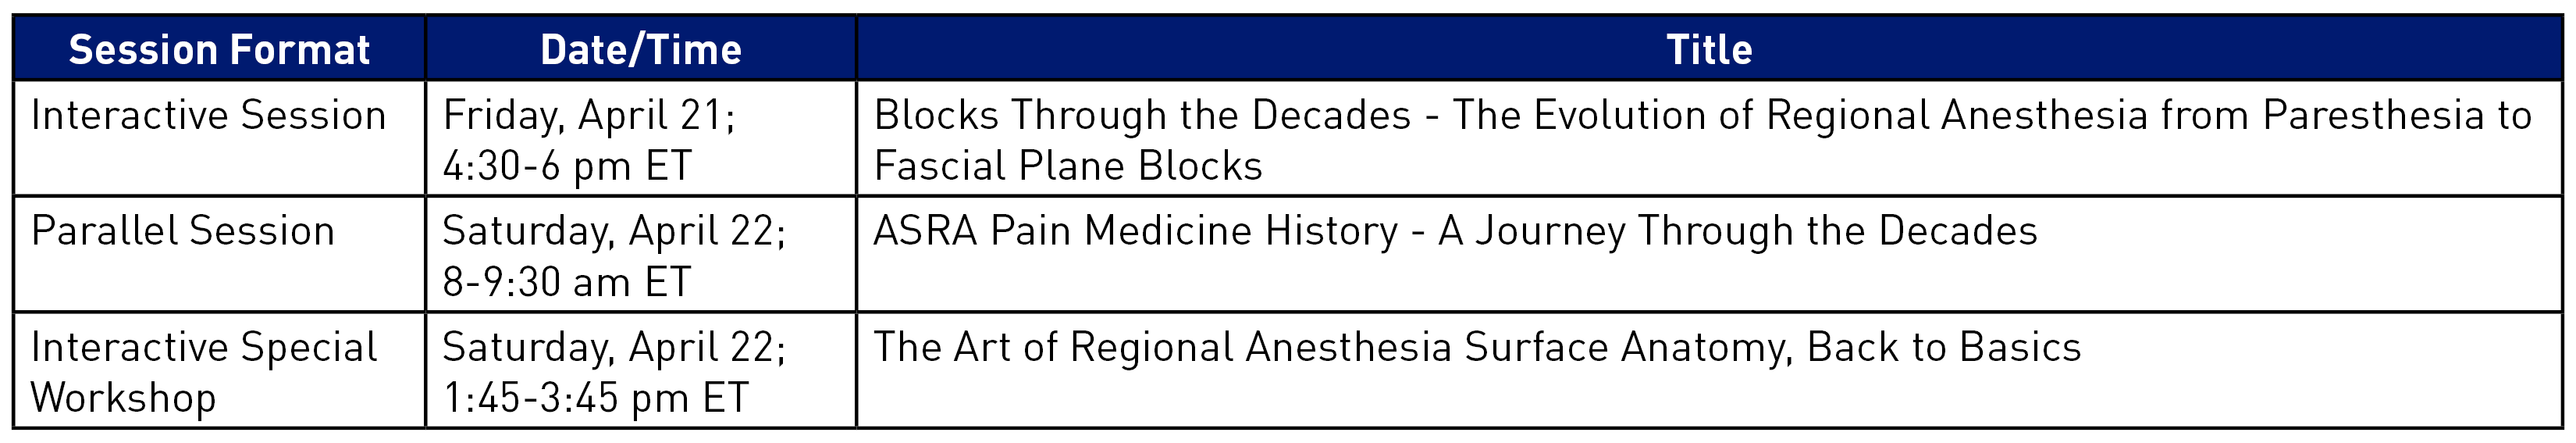 Summary of 100th Anniversary sessions at #ASRASpring23